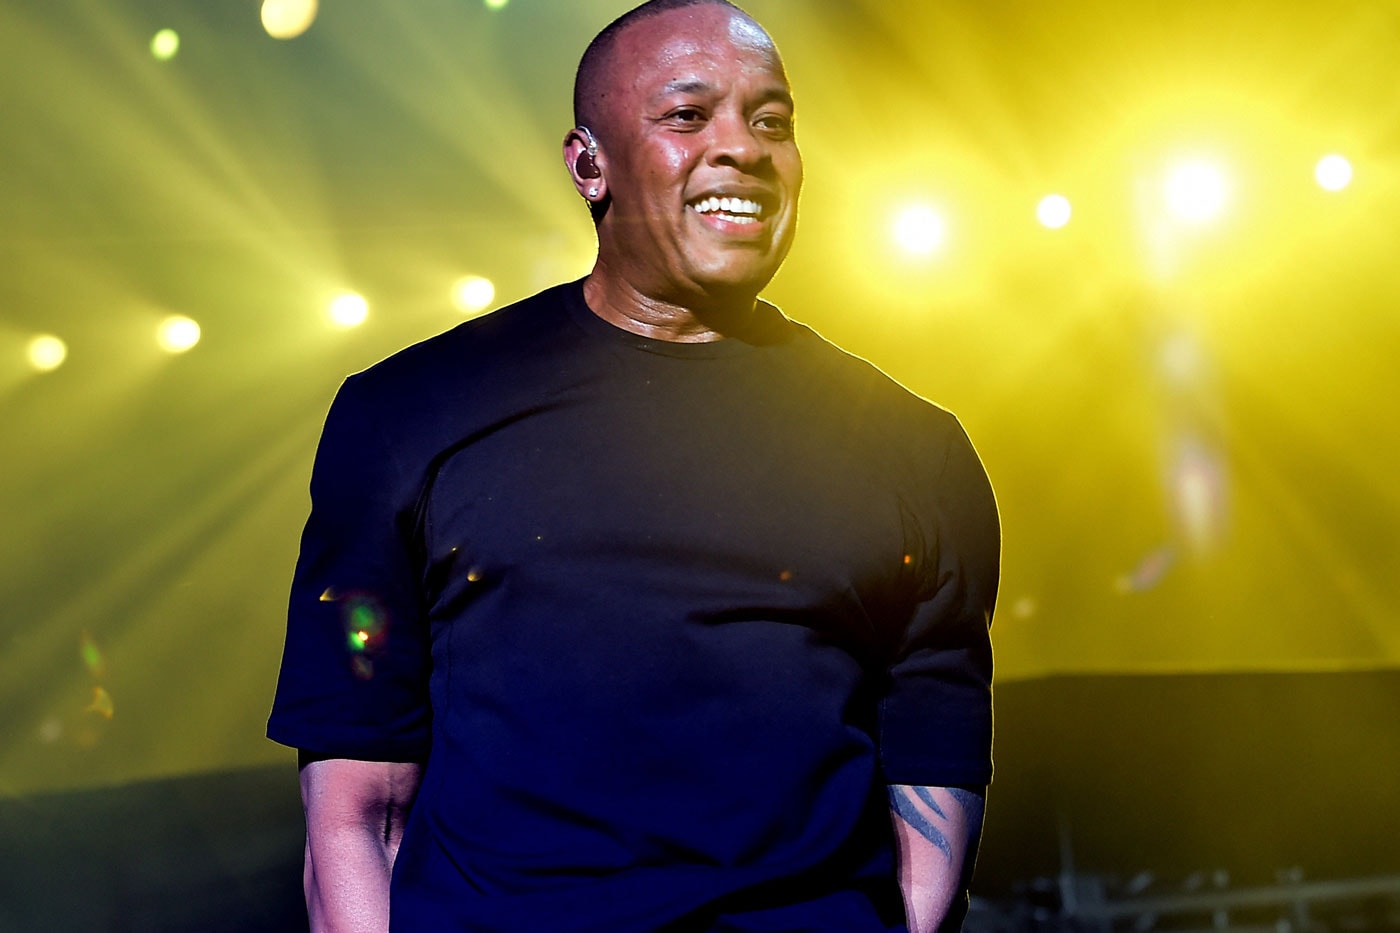 Dr Dre to Release Instrumental Album "The Planets"